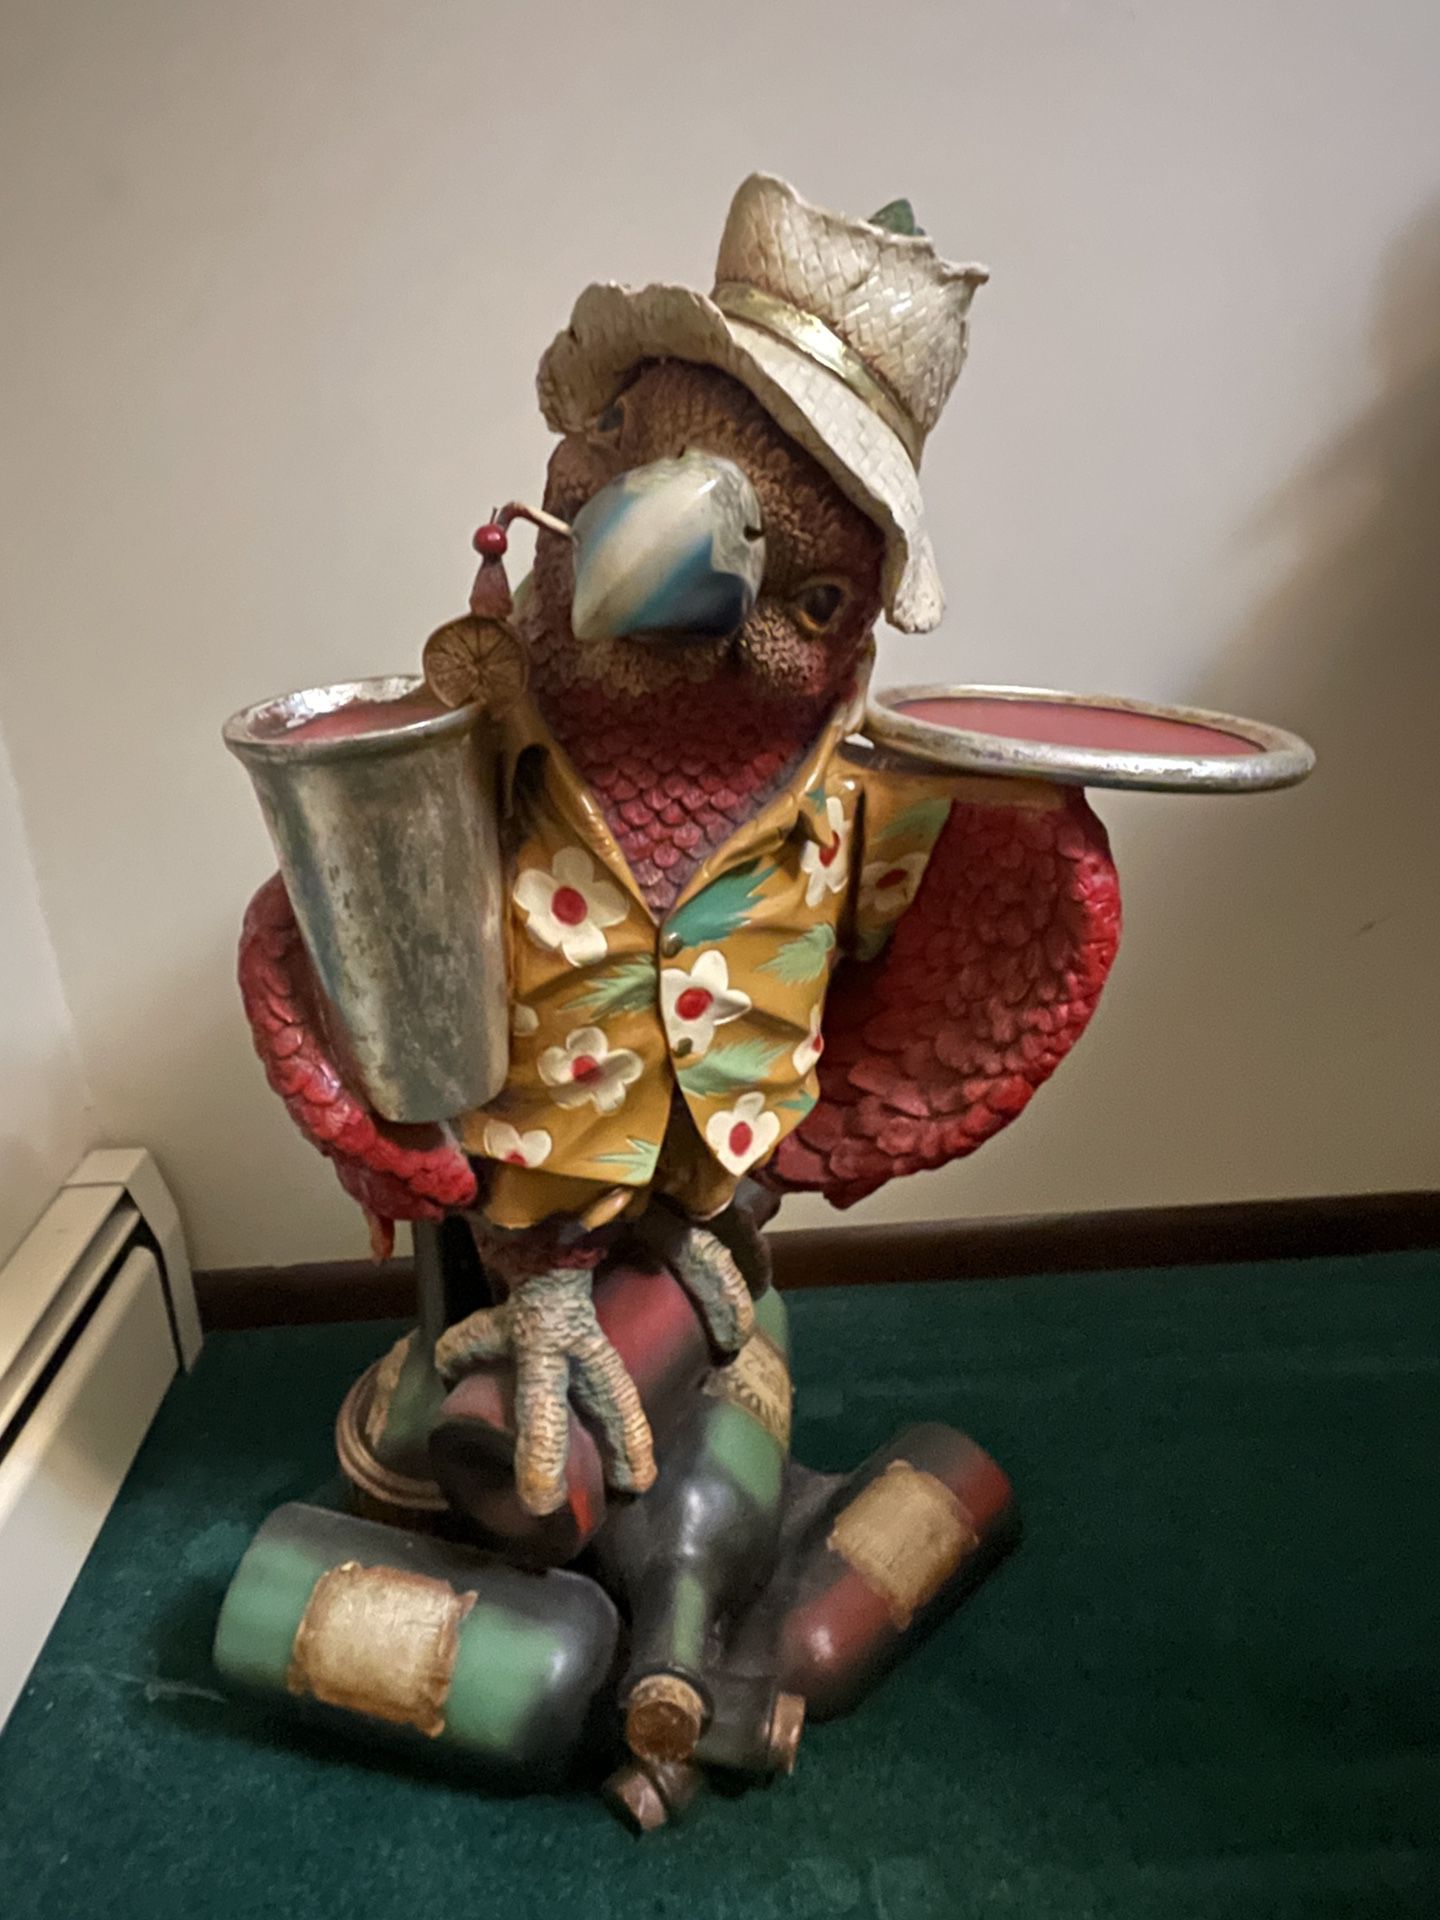 Parrot Butler billiard statue with serving tray 3 foot